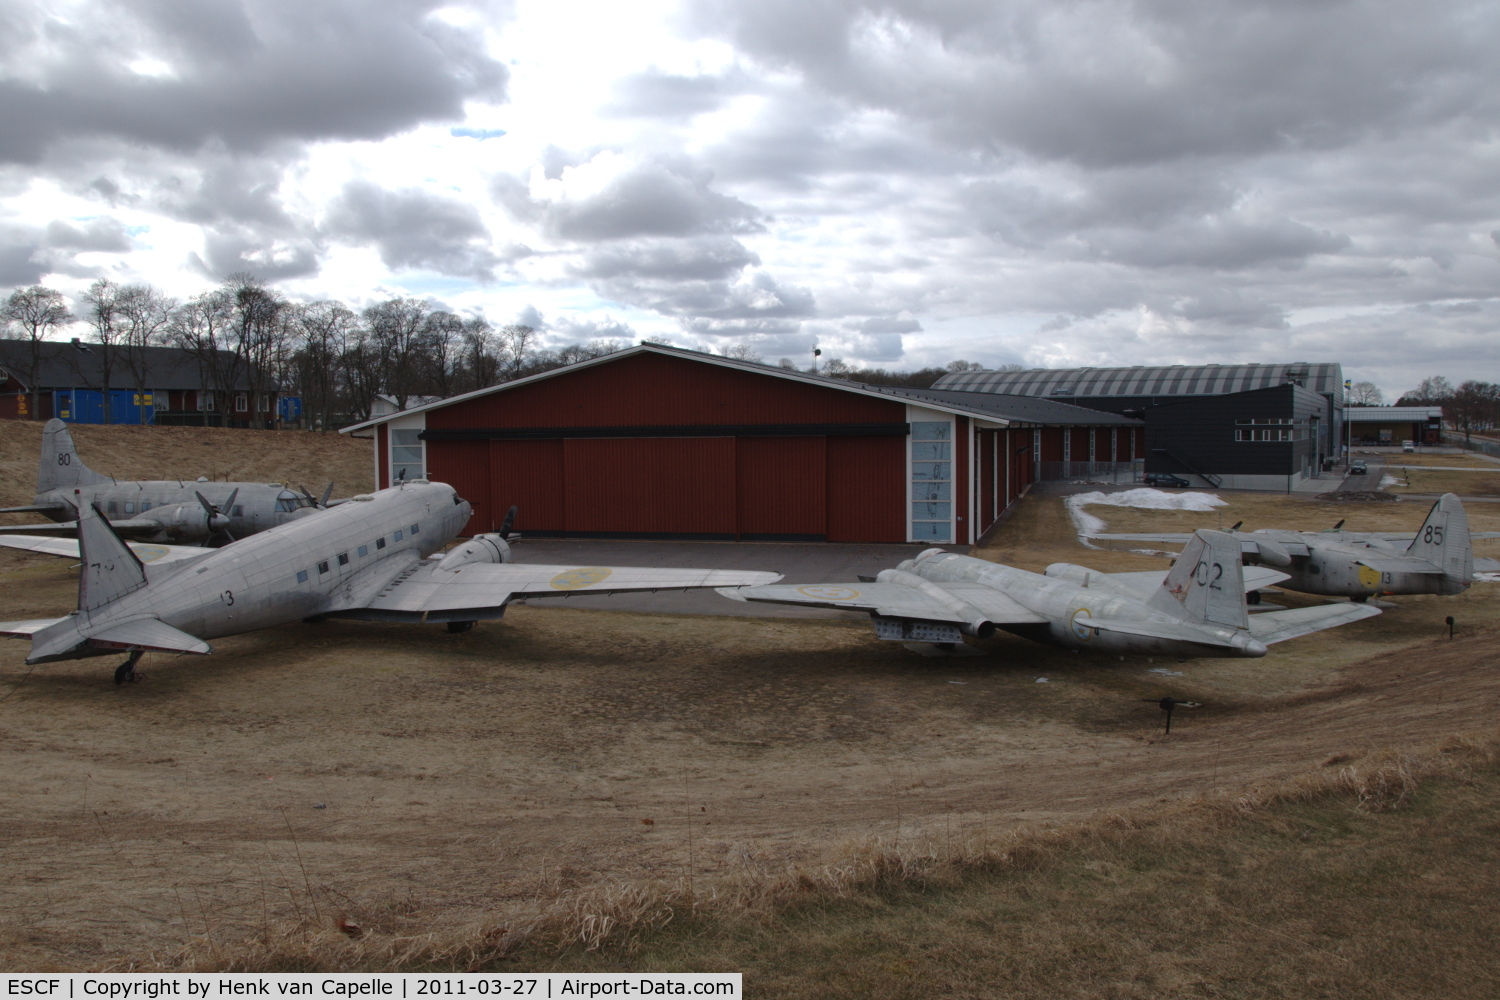 Malmen Air Base Airport, Linköping Sweden (ESCF) - The Flygvapenmuseum (Swedish Air Force Museum) at Malmen Air Base. The four aircraft are Varsity, Dakota, Canberra and Pembroke.